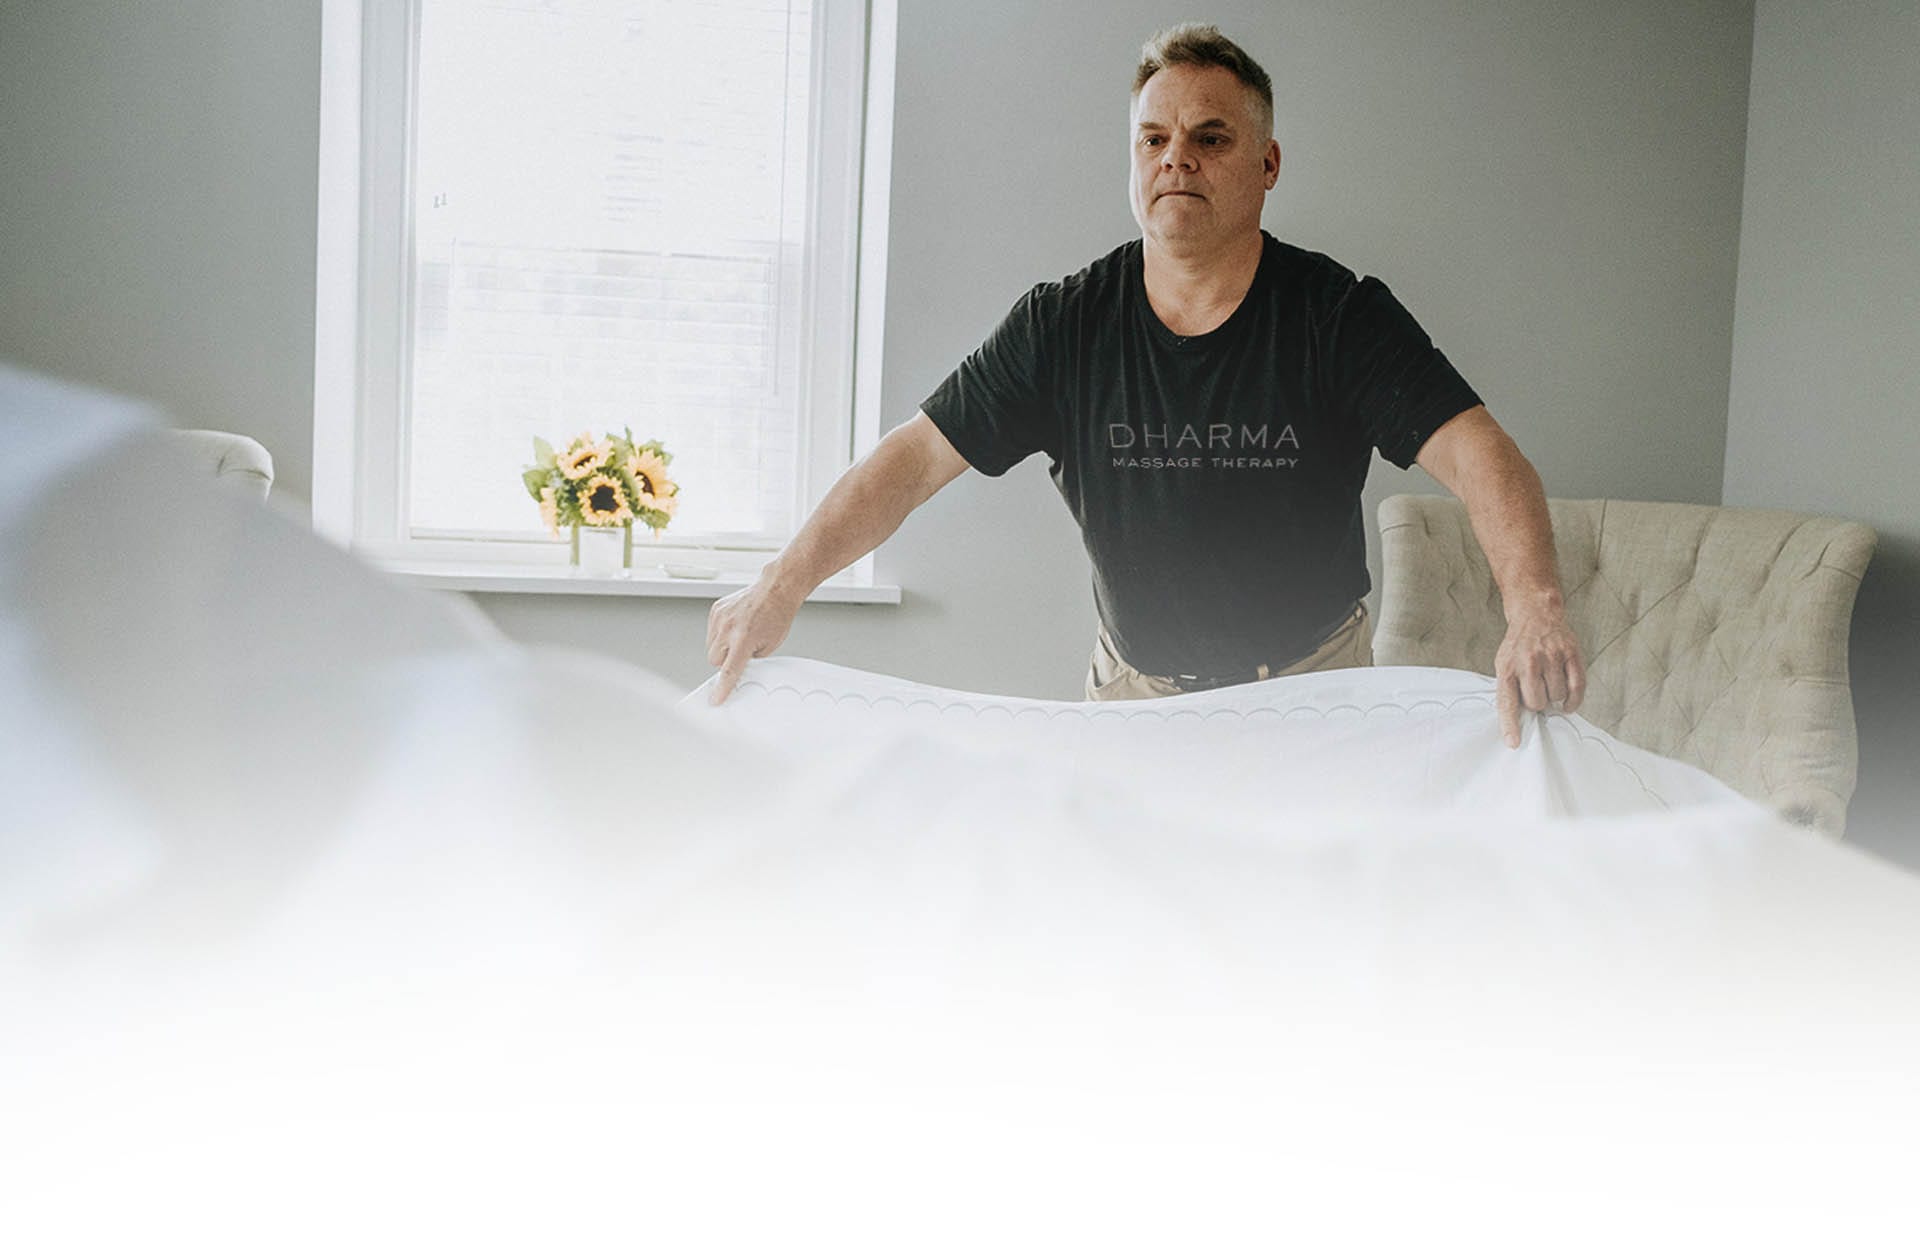 Massage therapist setting up massage table with clean sheets